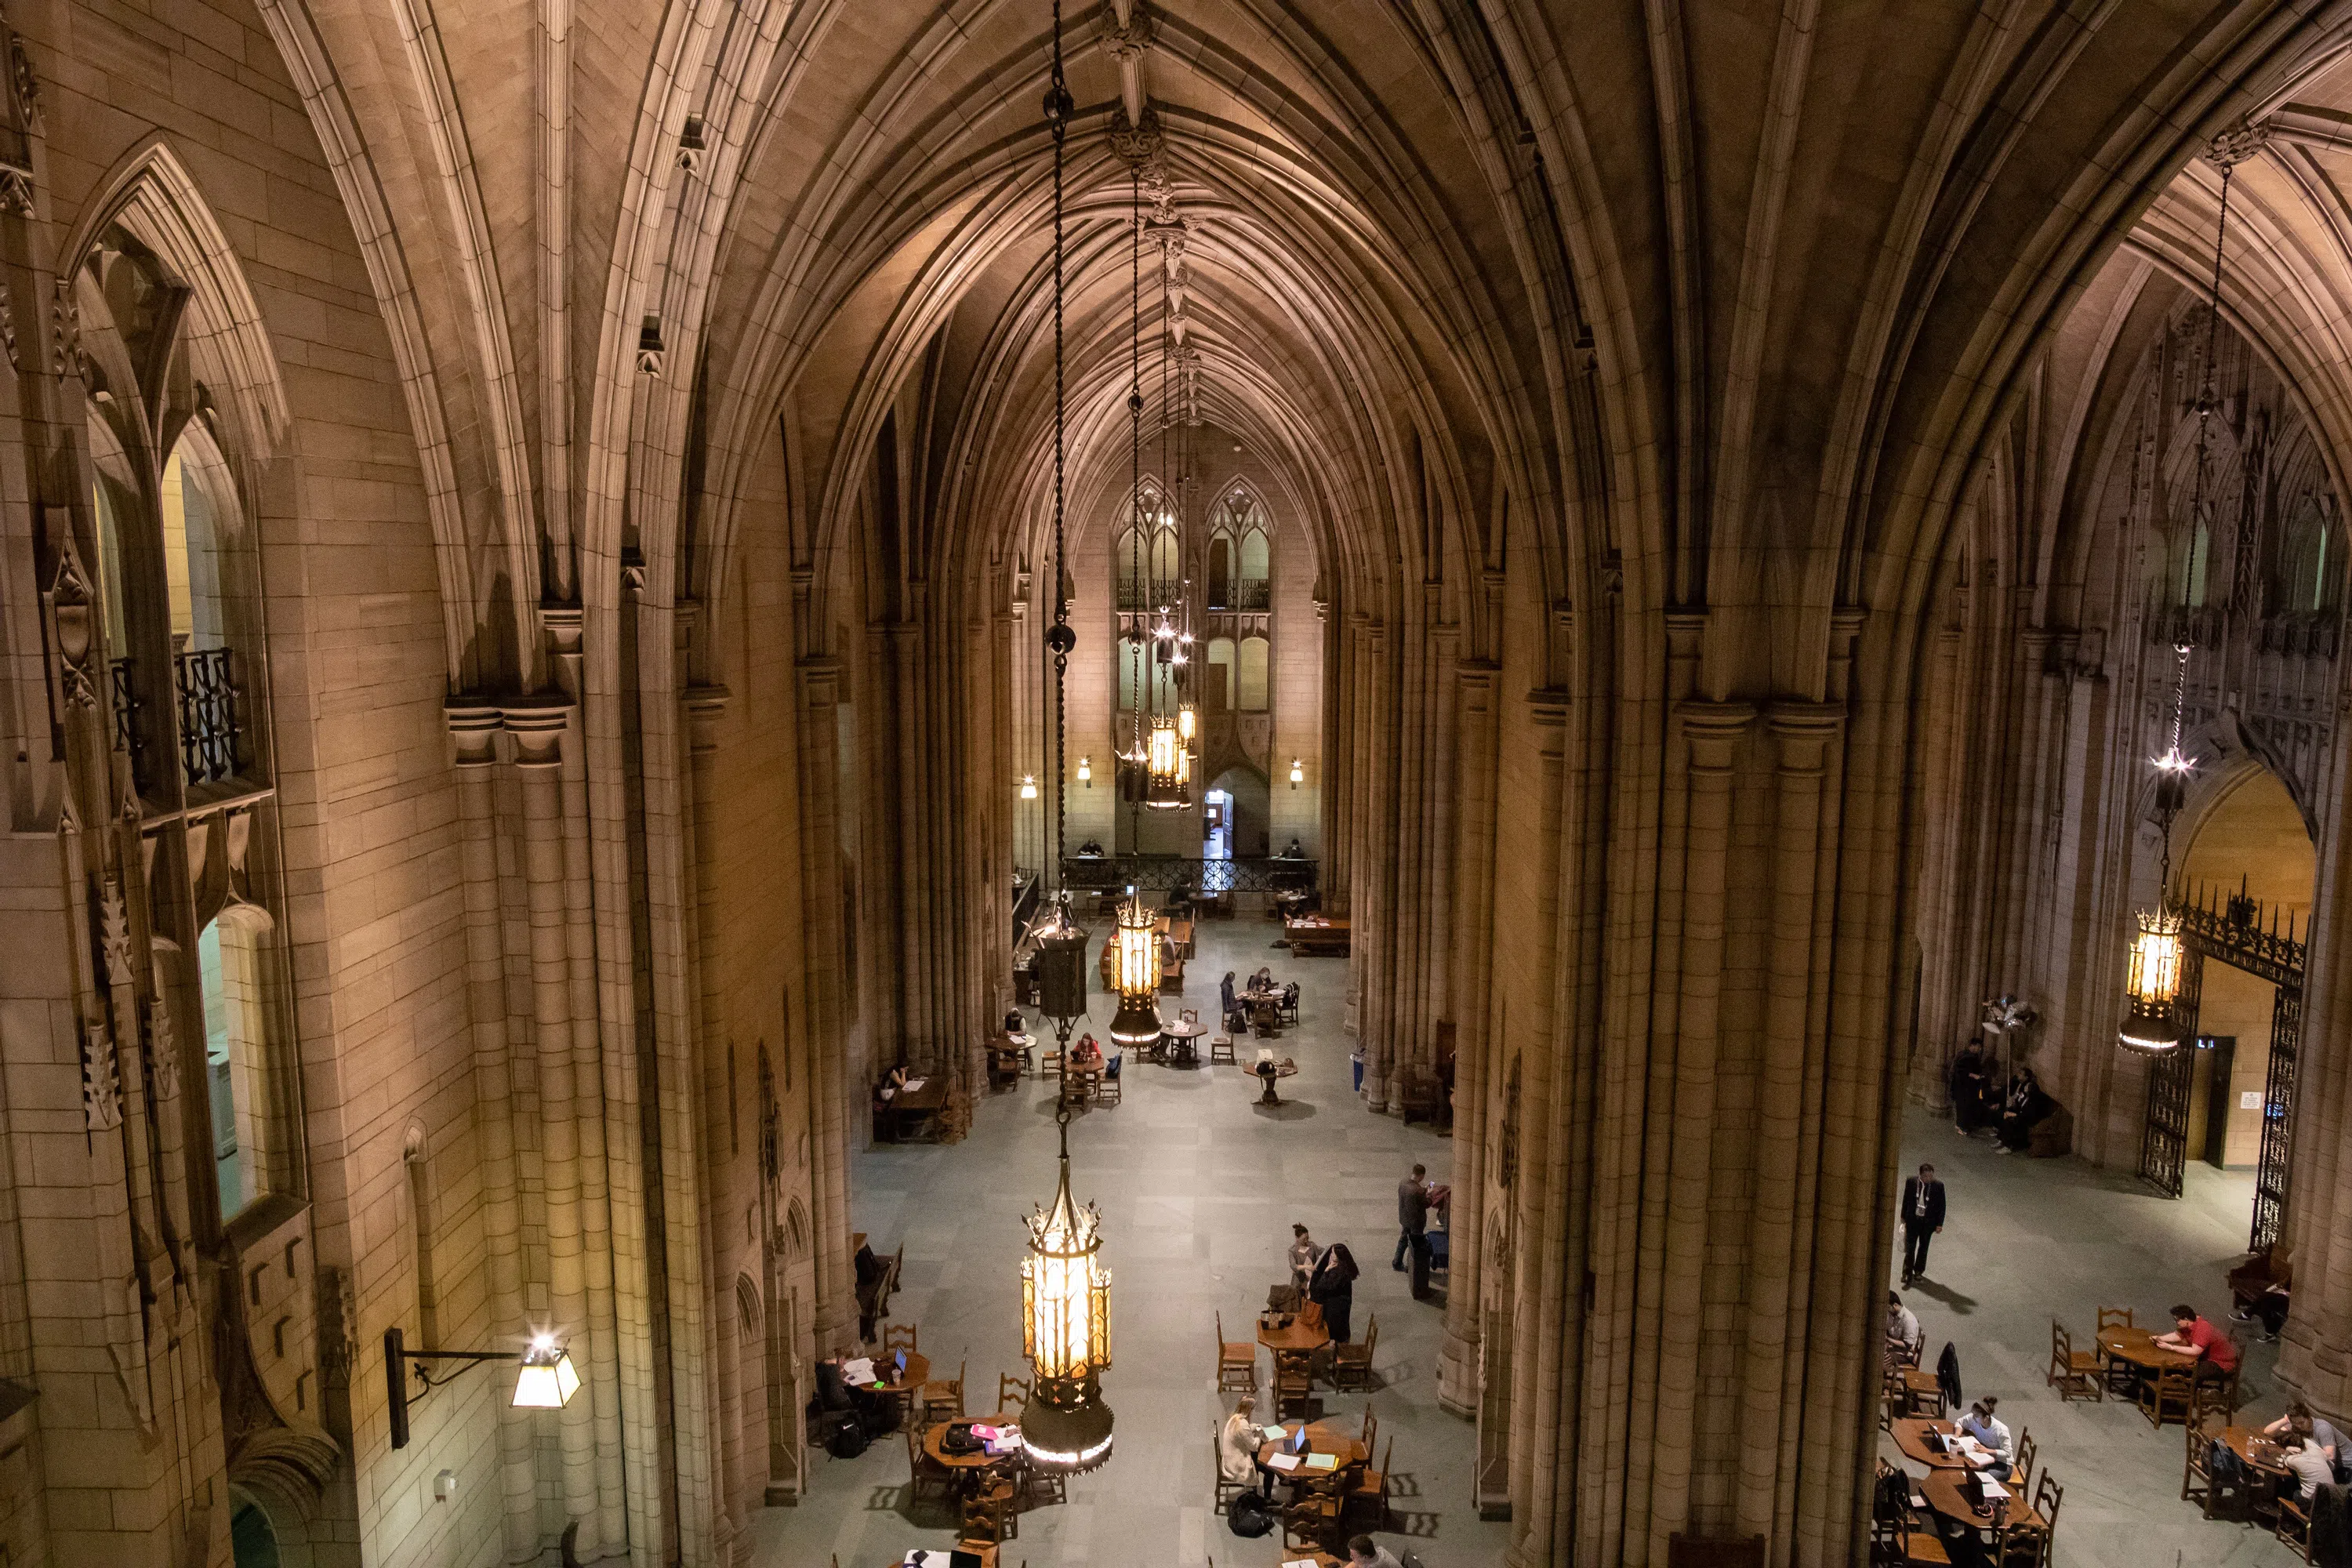 Bird's eye view of students studying in the Cathedral Commons Room